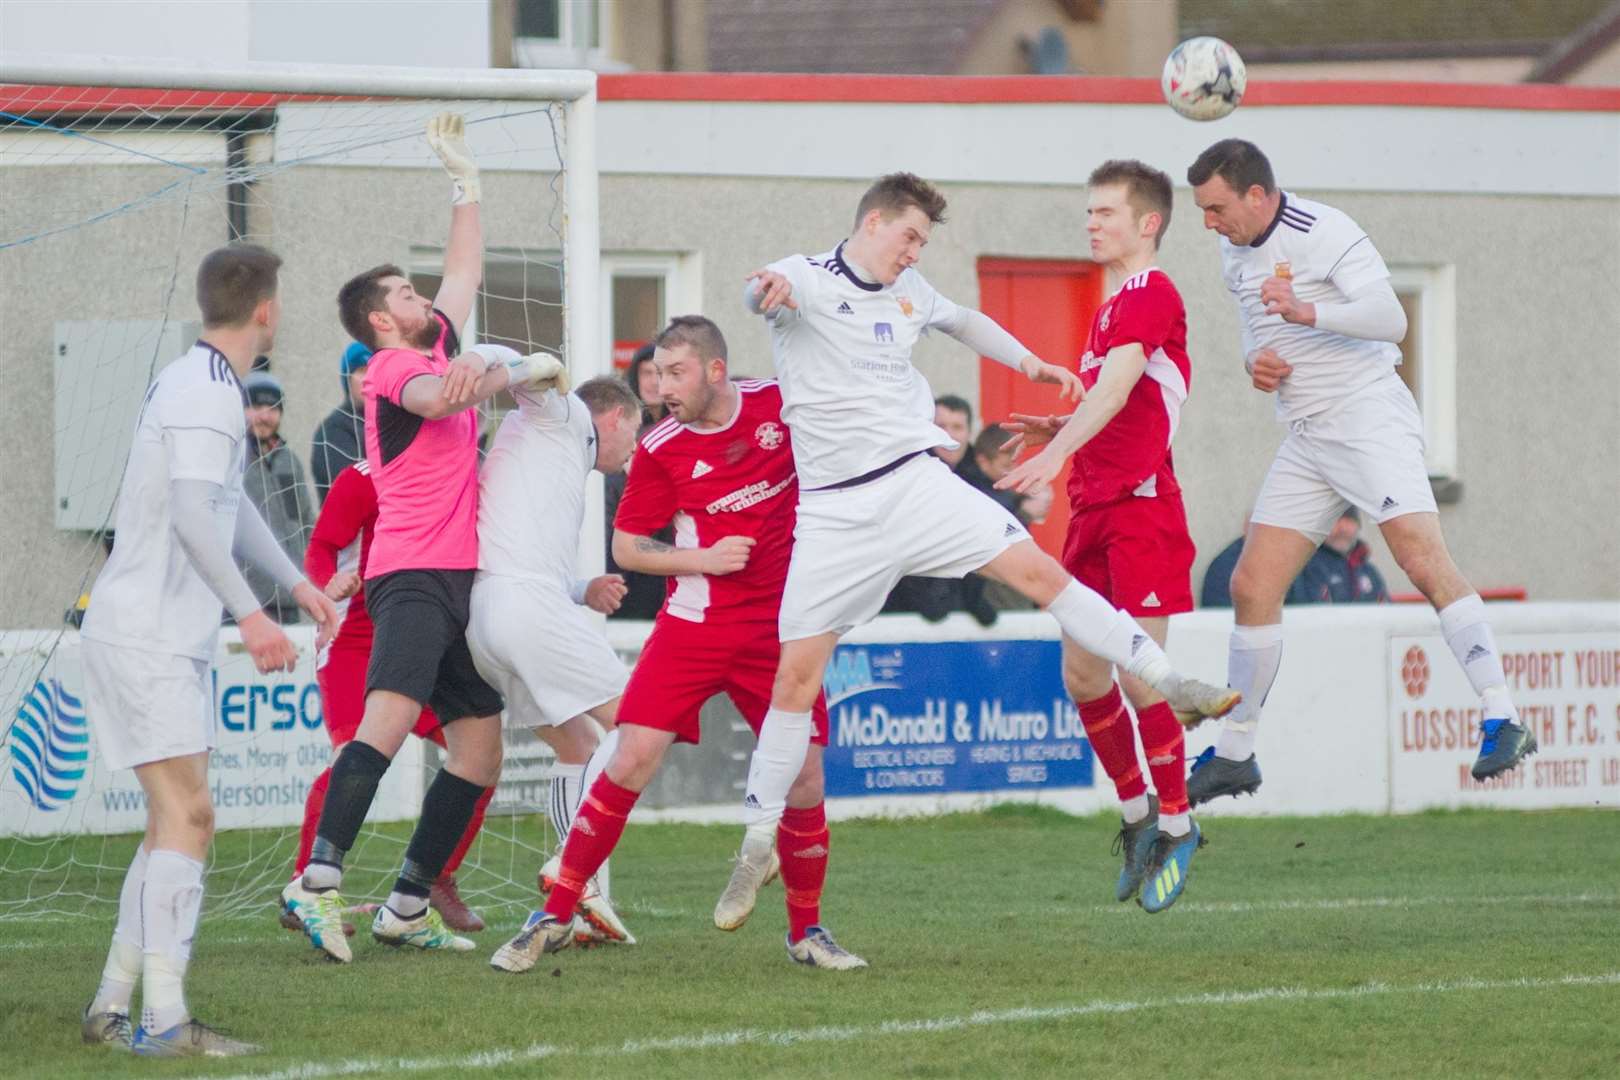 Lossiemouth v Rothes